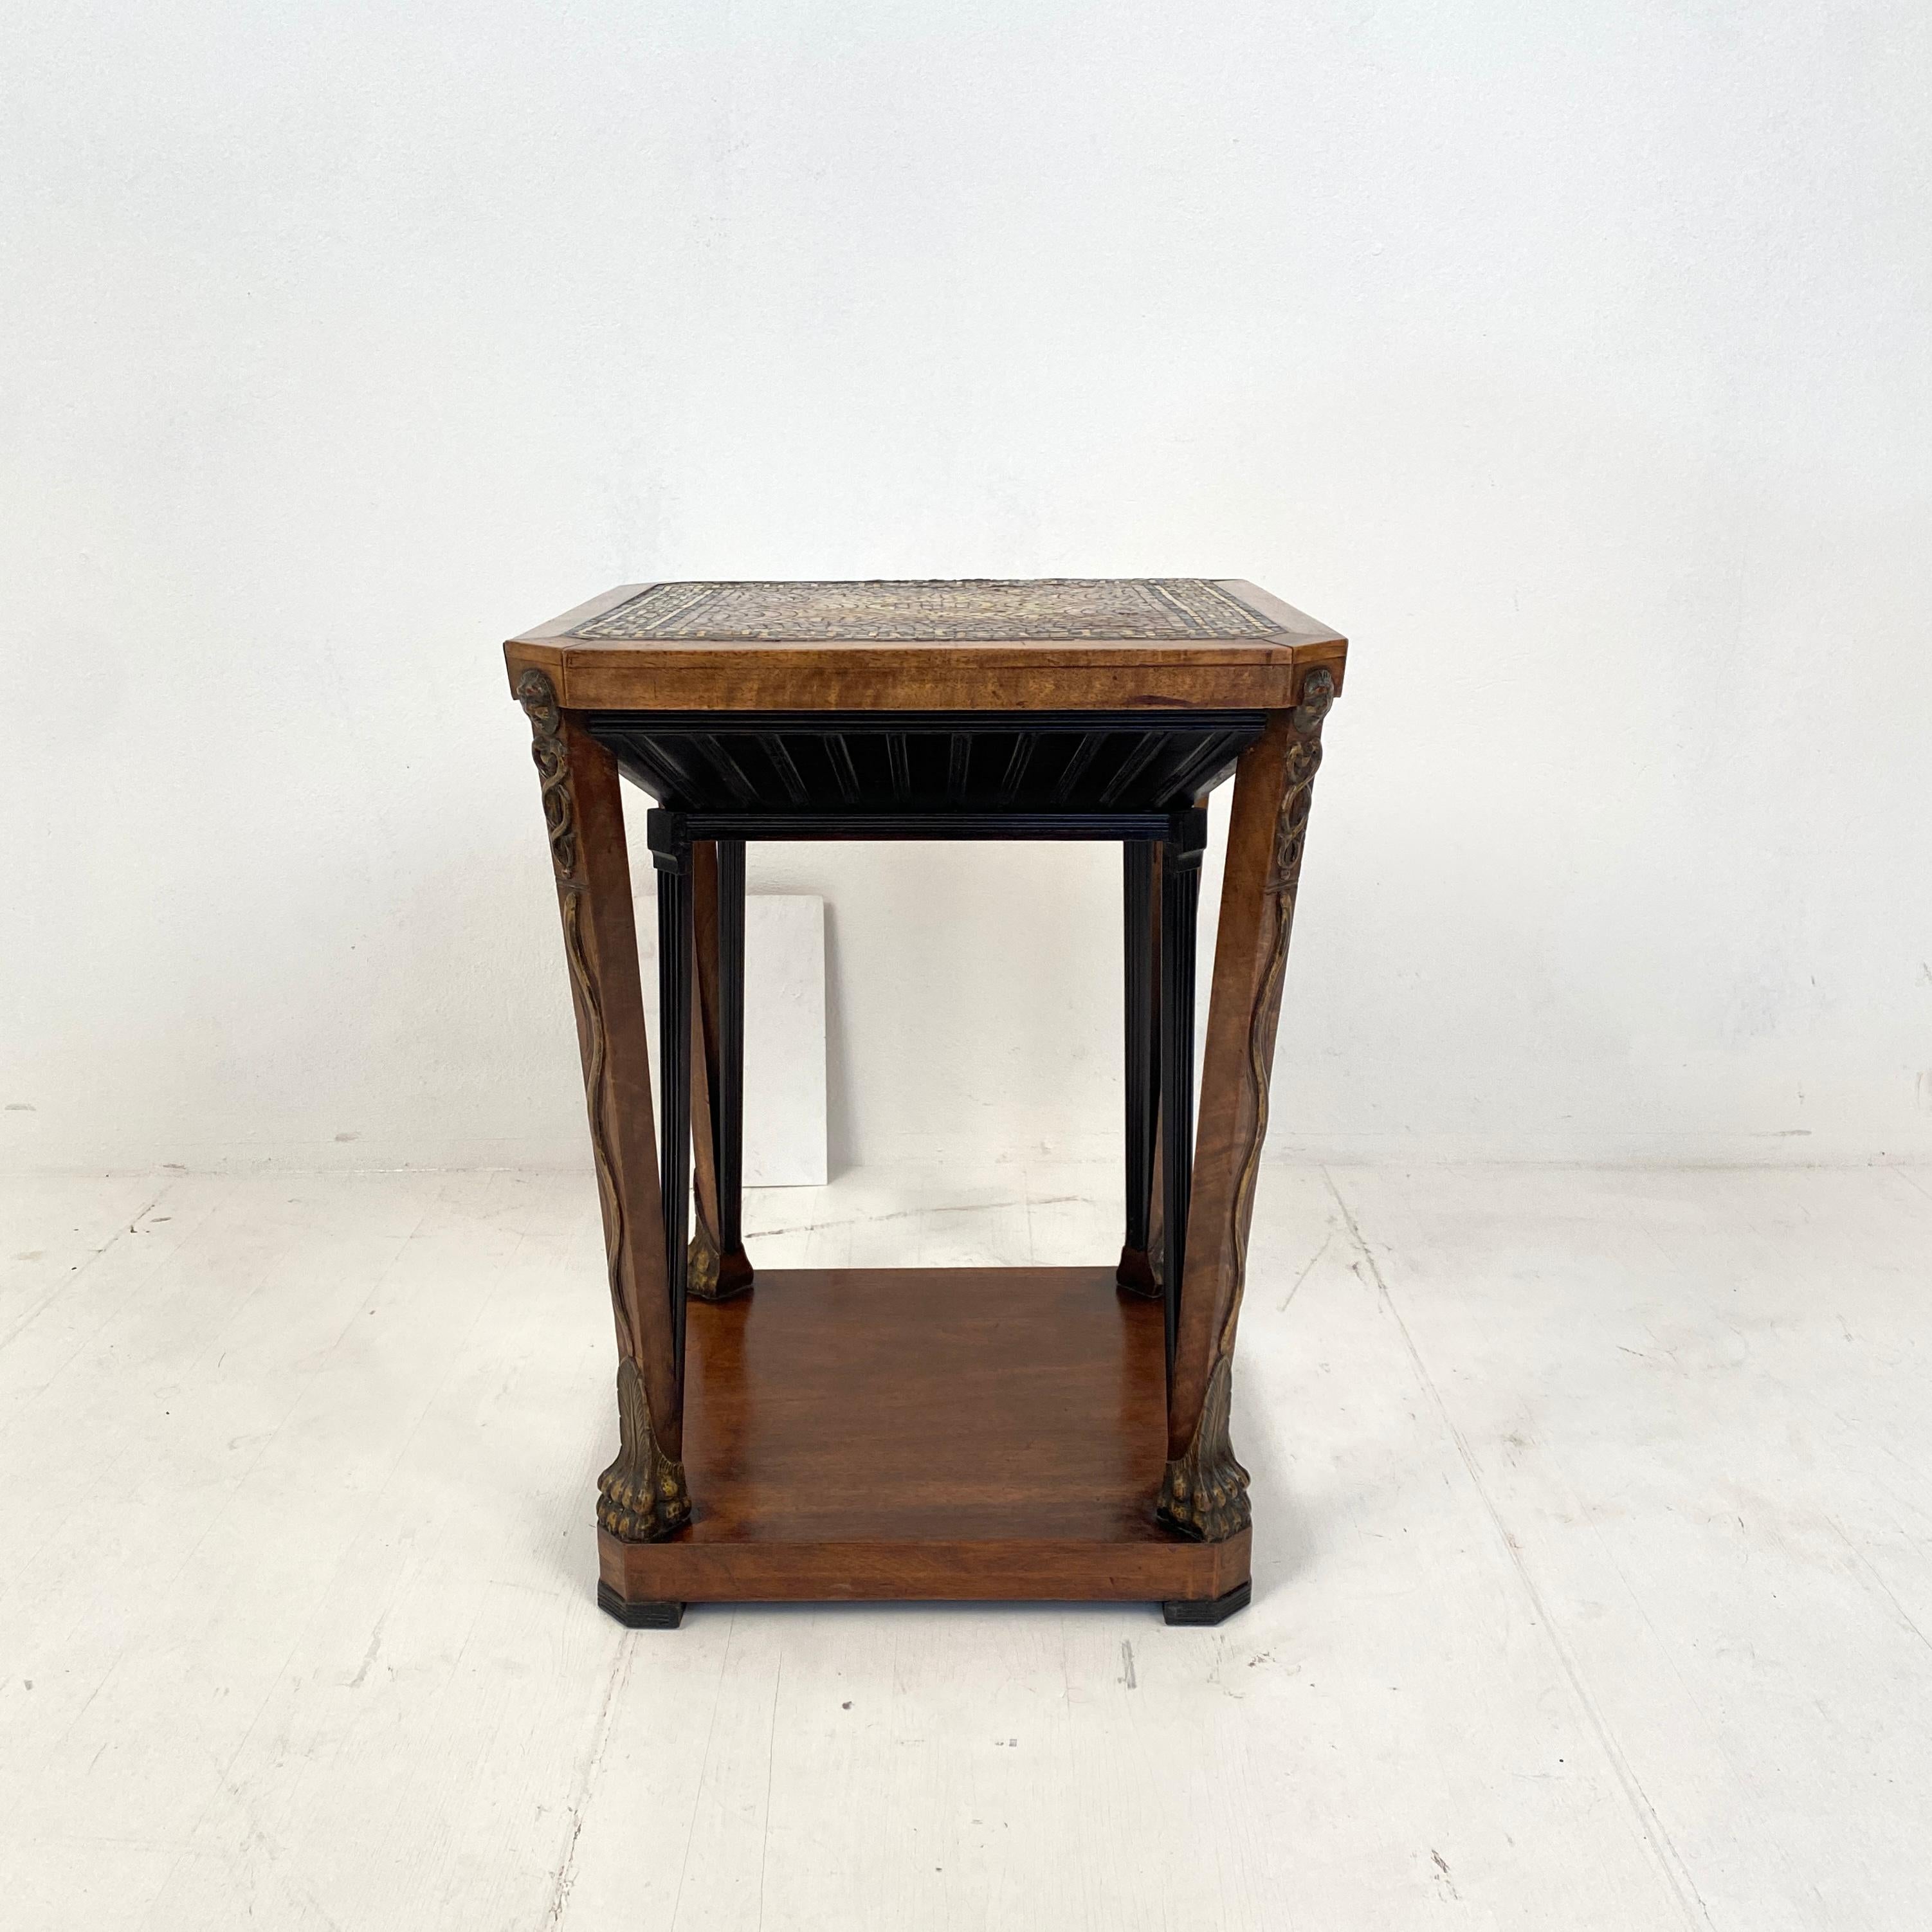 Gilt French Art Deco Chemist Side Table with Mosaic Top and Carved Base, around 1920